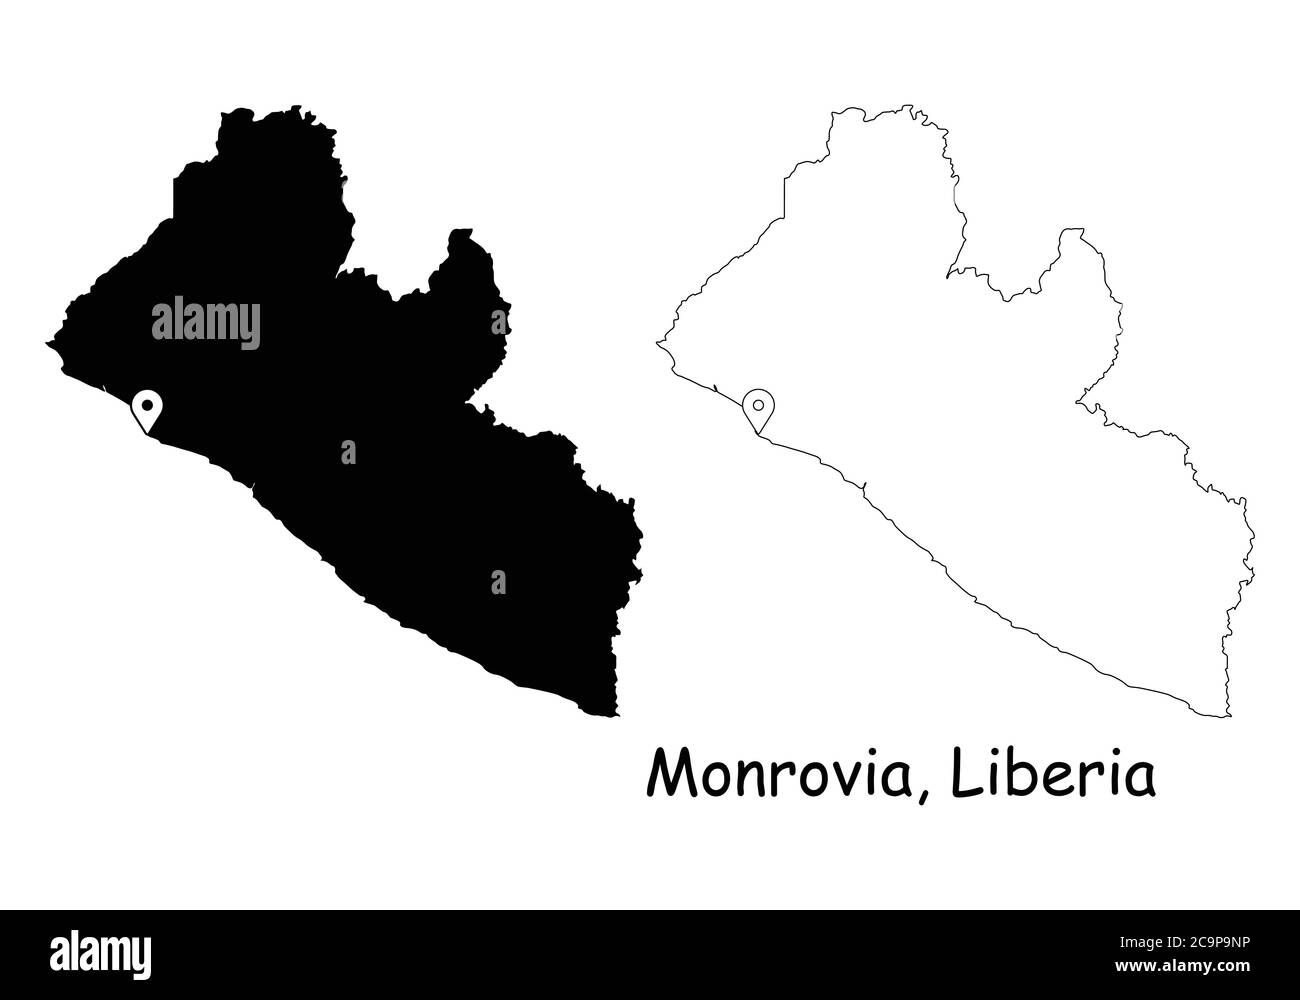 Monrovia Liberia. Detailed Country Map with Location Pin on Capital City. Black silhouette and outline maps isolated on white background. EPS Vector Stock Vector